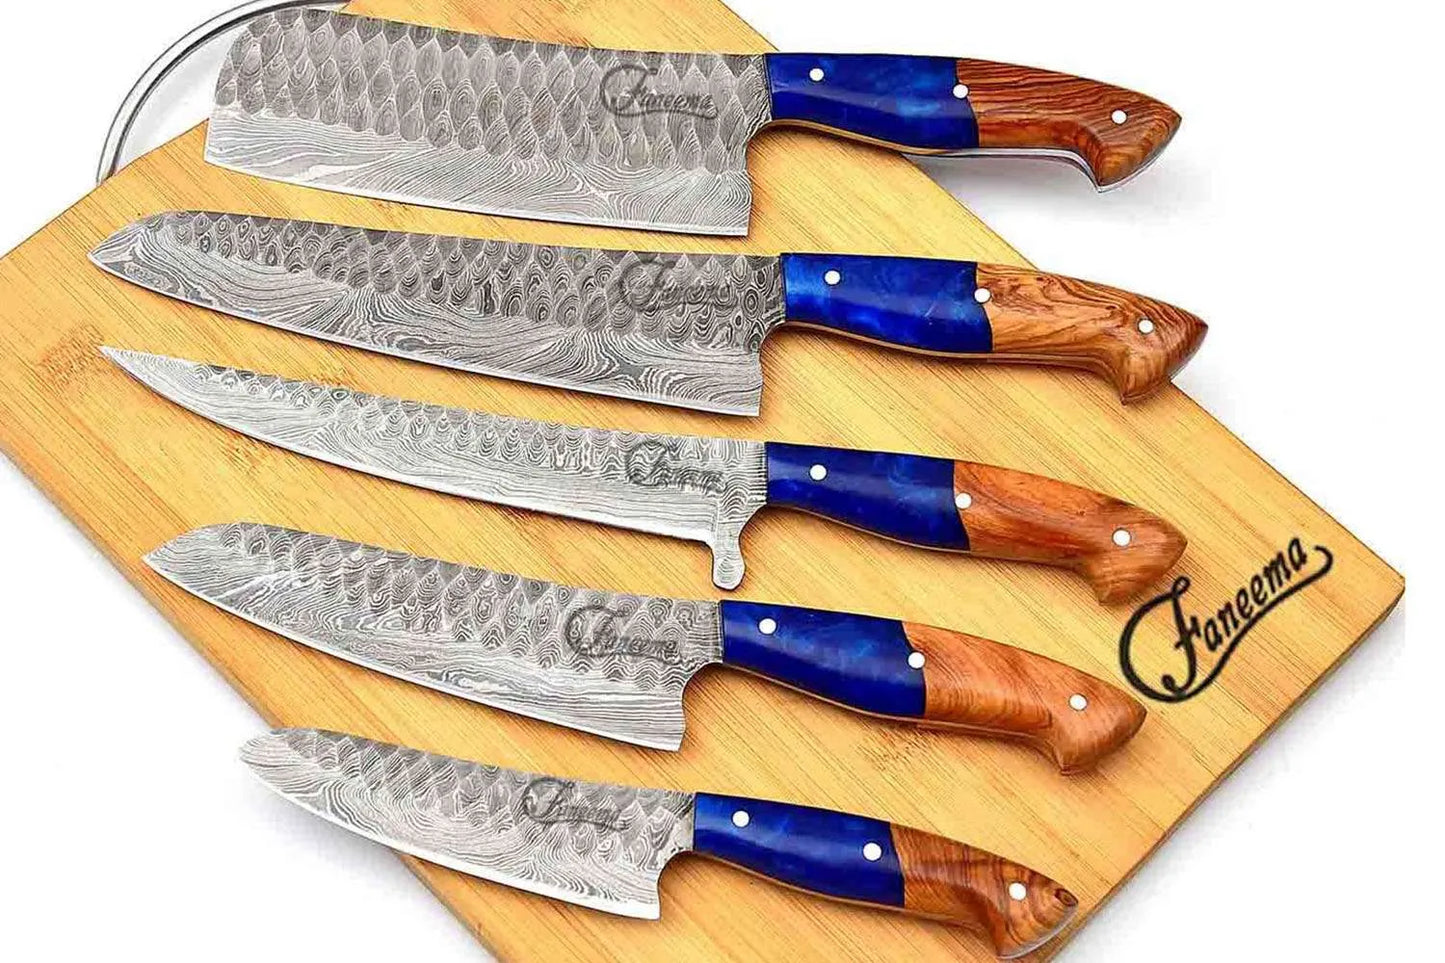 Top 5 Factors to Consider When Buying Kitchen Knife Sets – Faneema